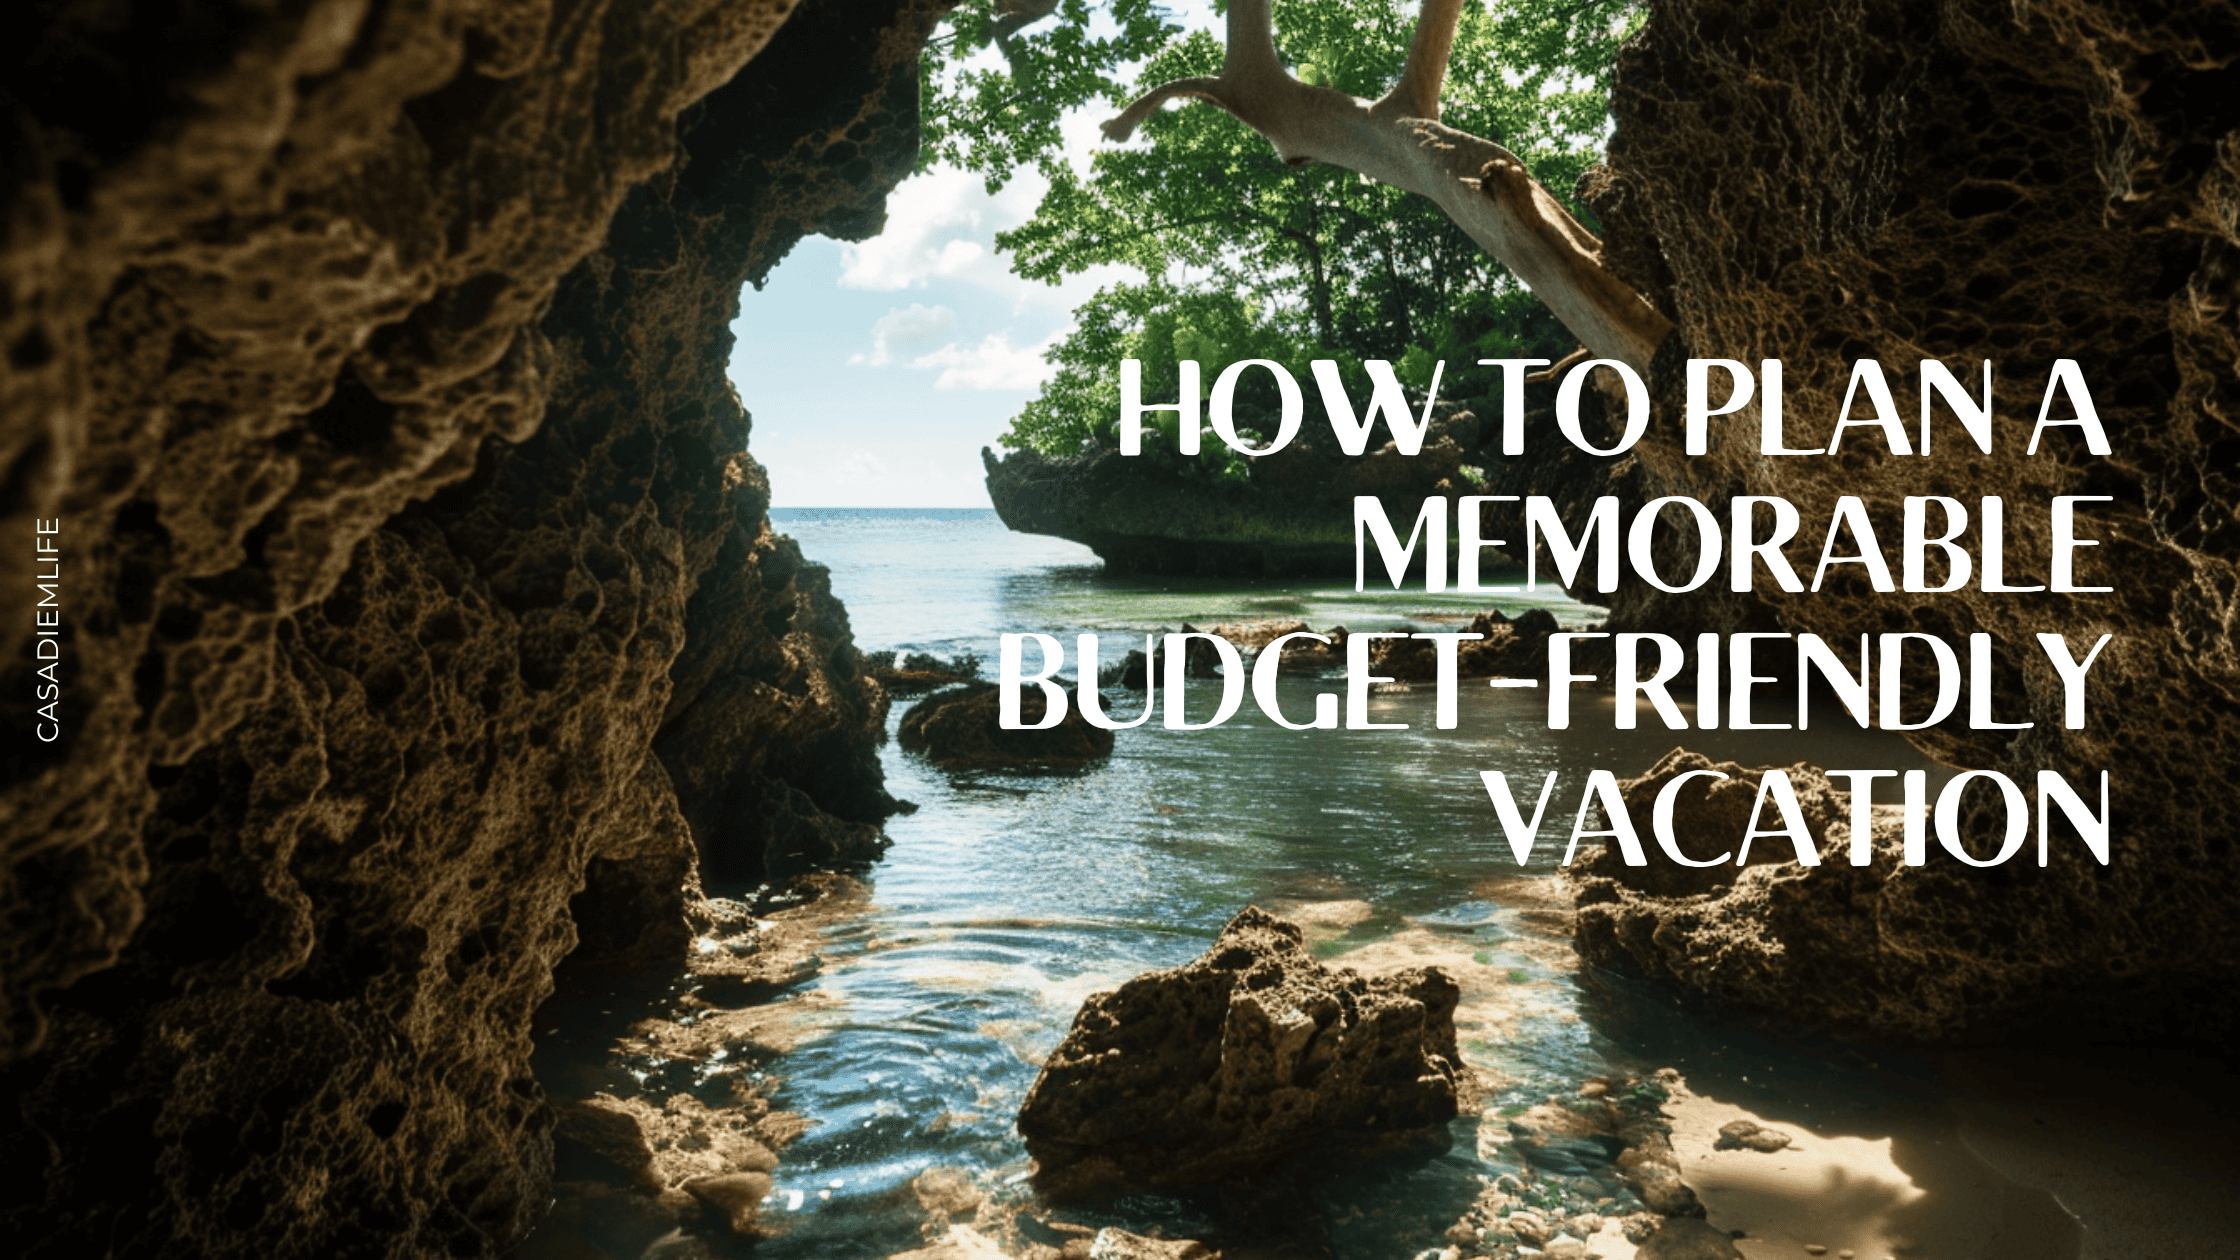 How to Plan a Budget Friendly Vacation